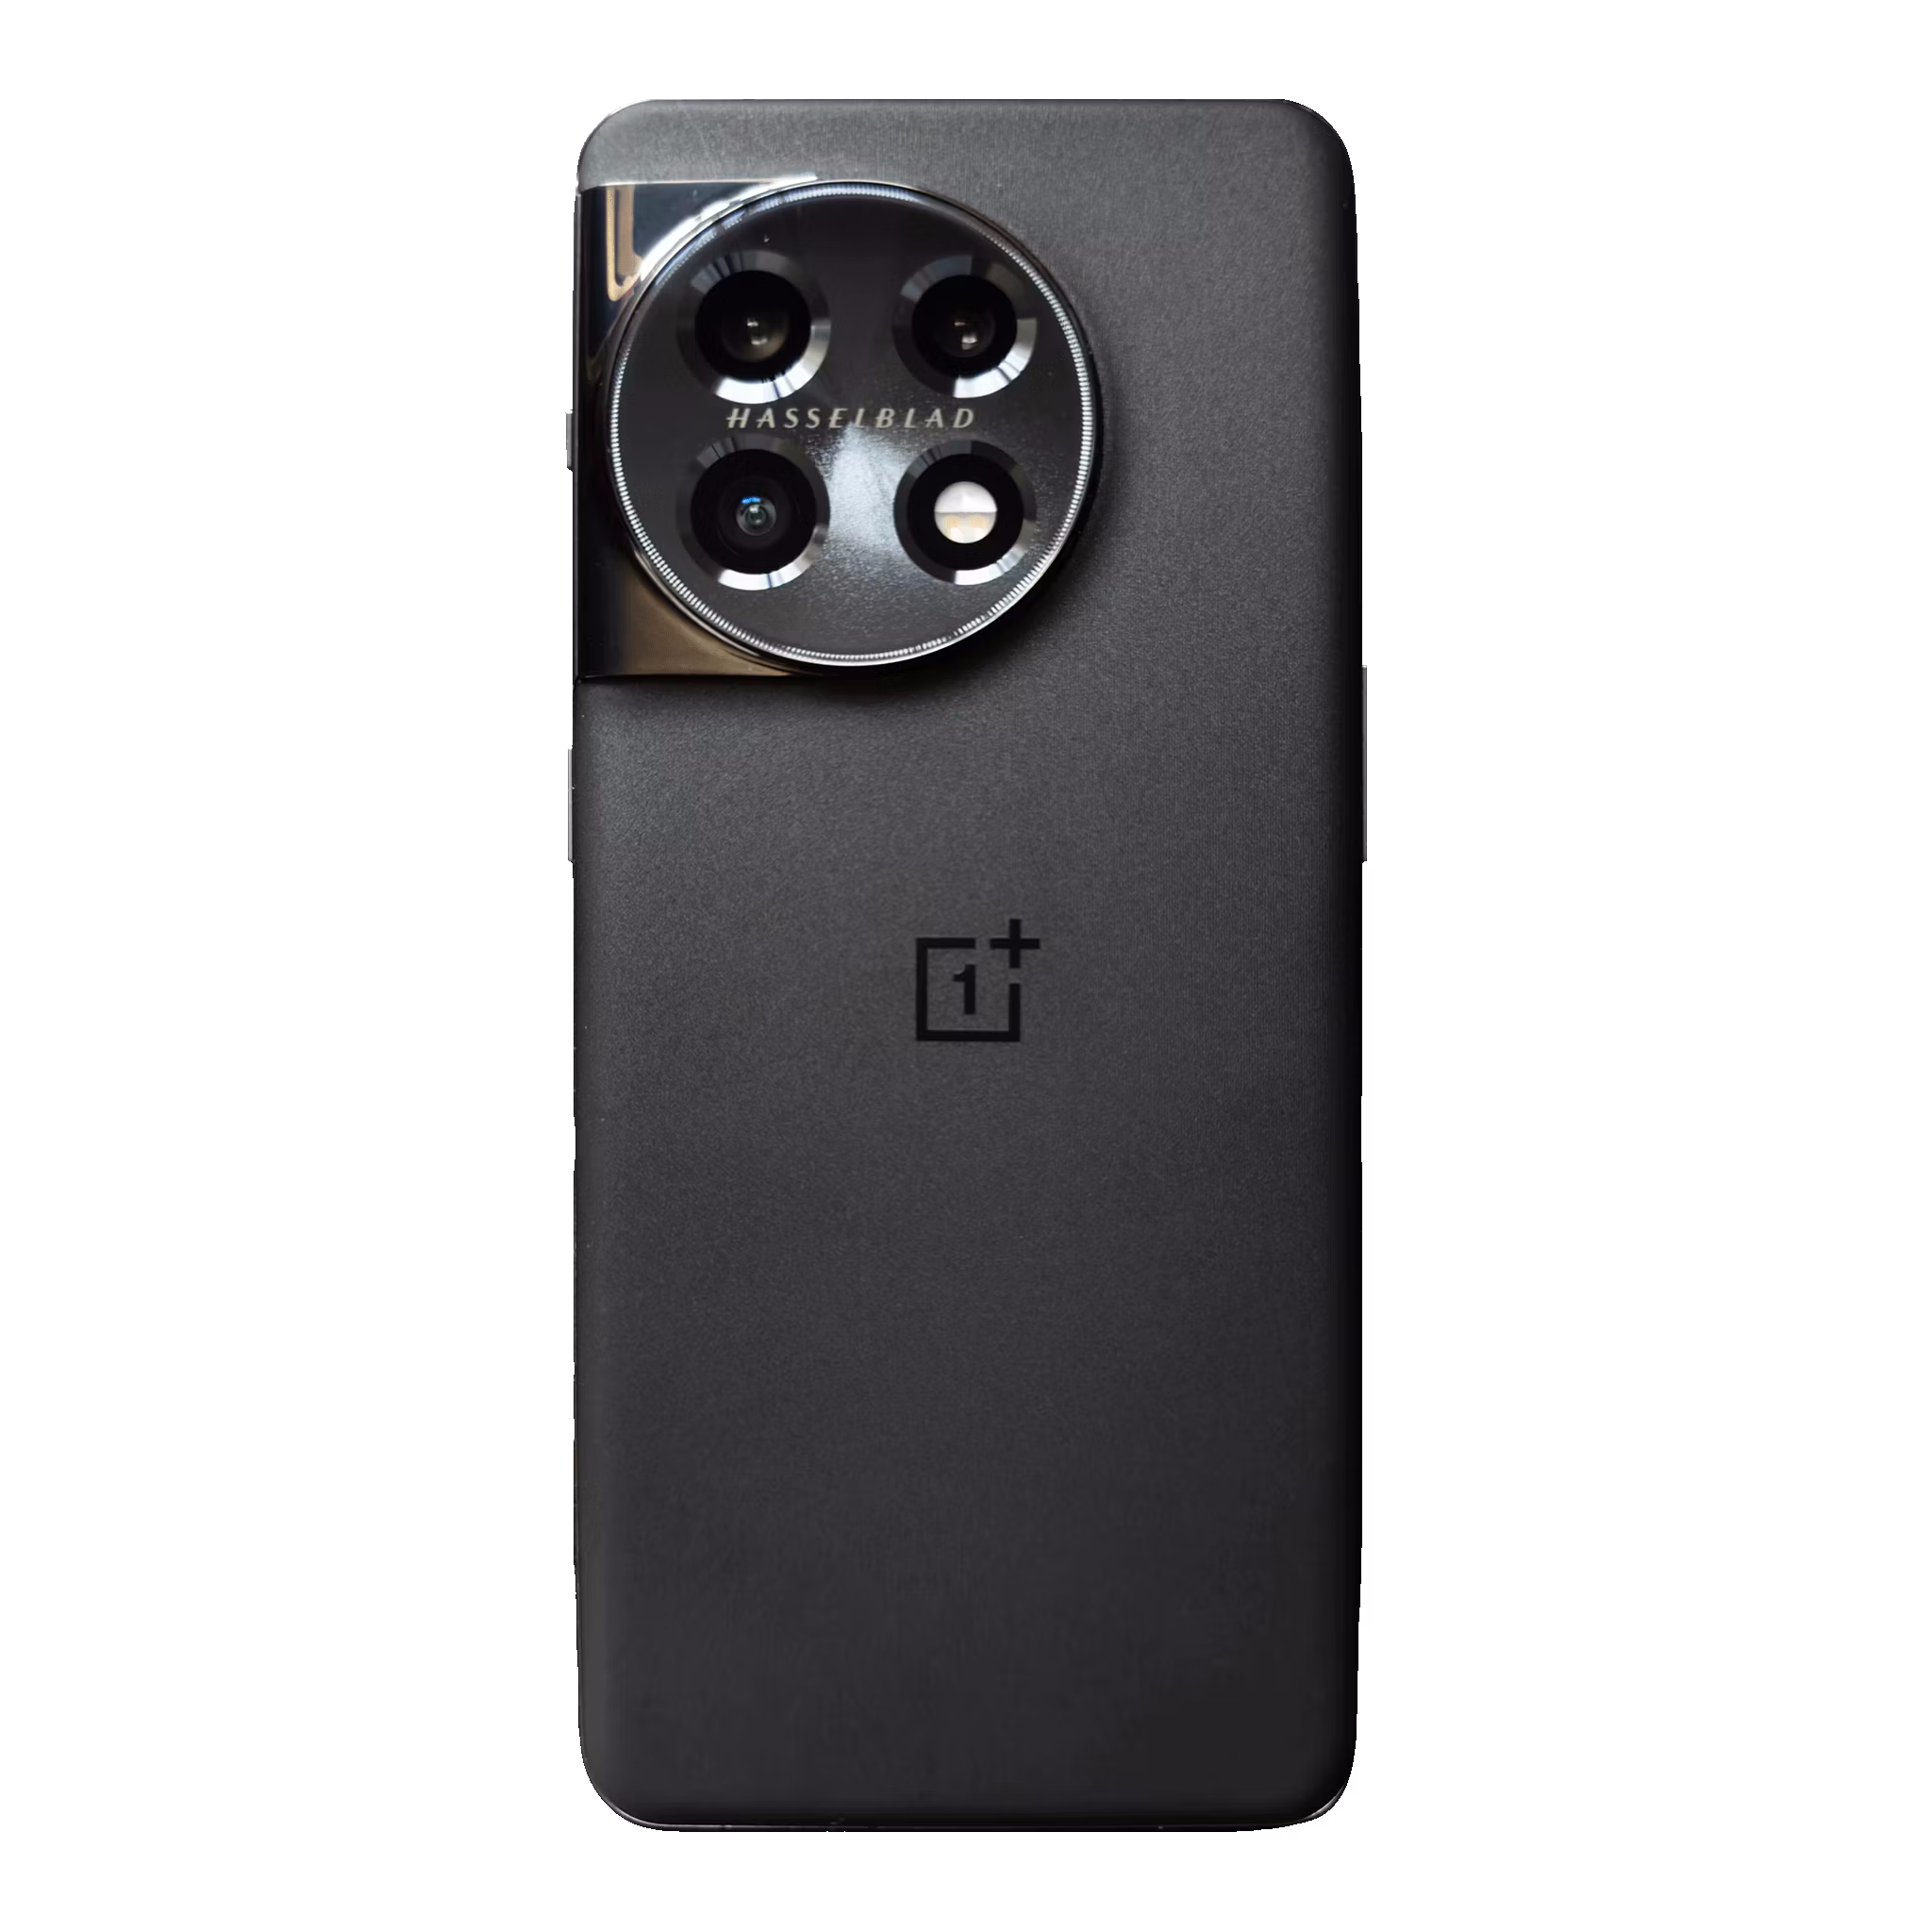 OnePlus 11 is officially here but you'll have to wait another